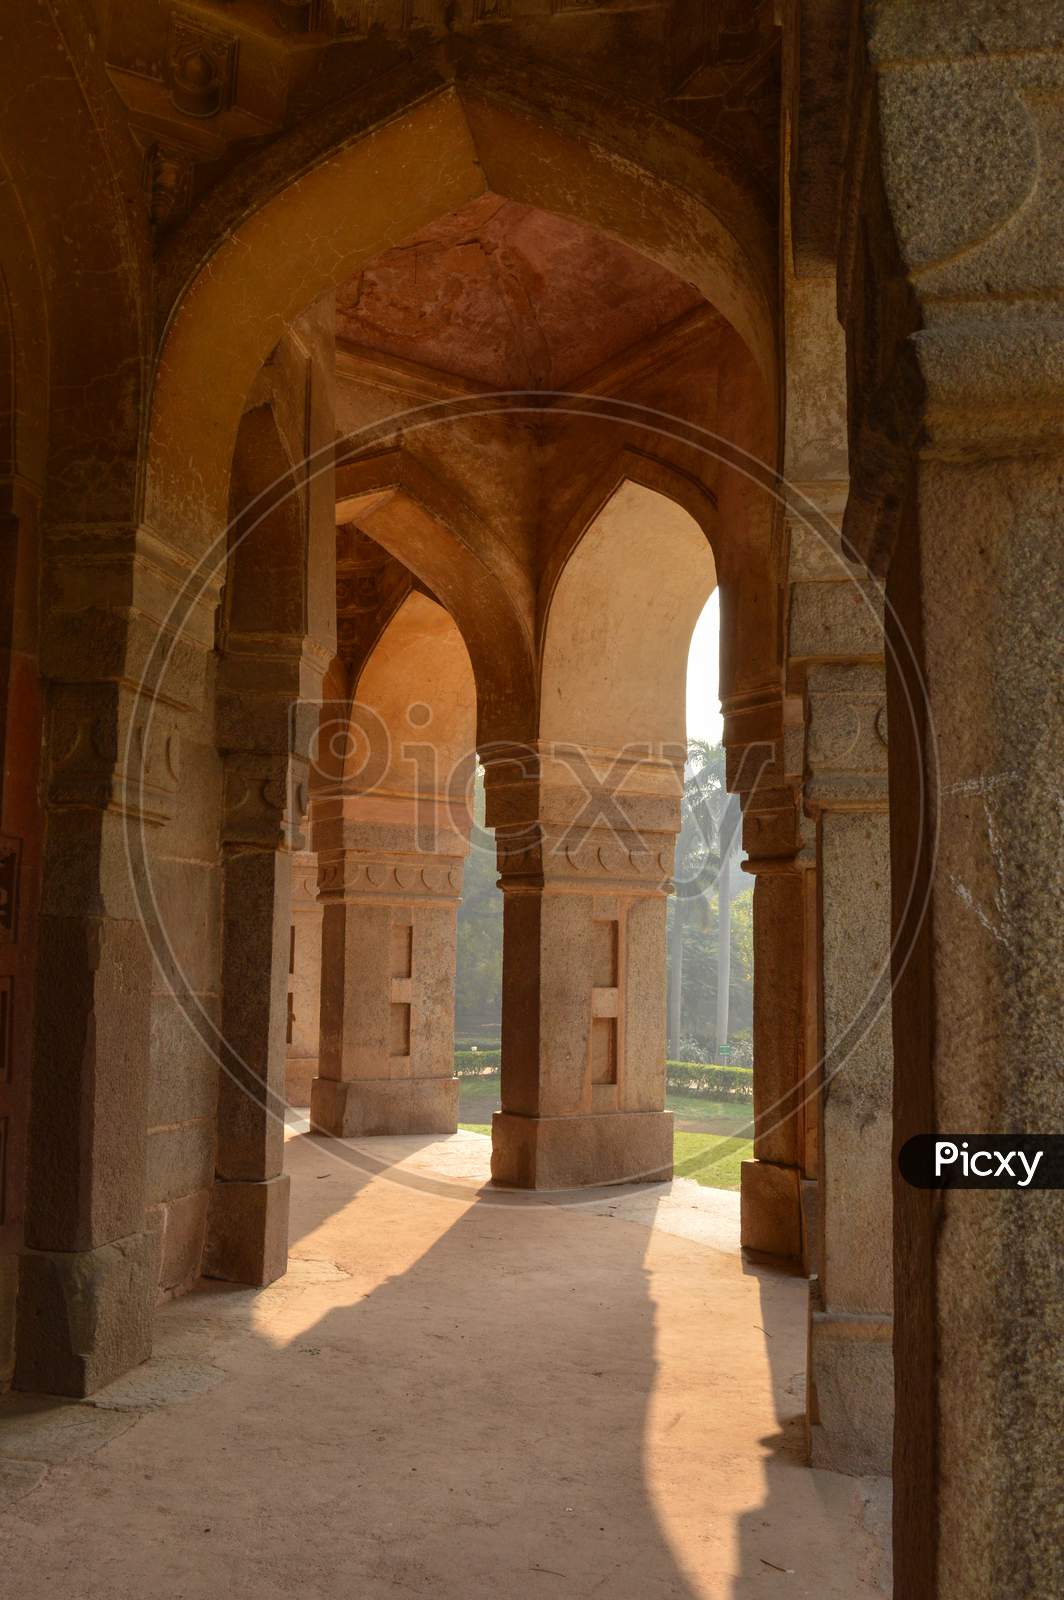 A Design Inside Of Tomb Of Sikandar Lodhi Monument At Lodi Garden Or Lodhi Gardens In A City Park From The Side Of The Lawn At Winter Foggy Morning.